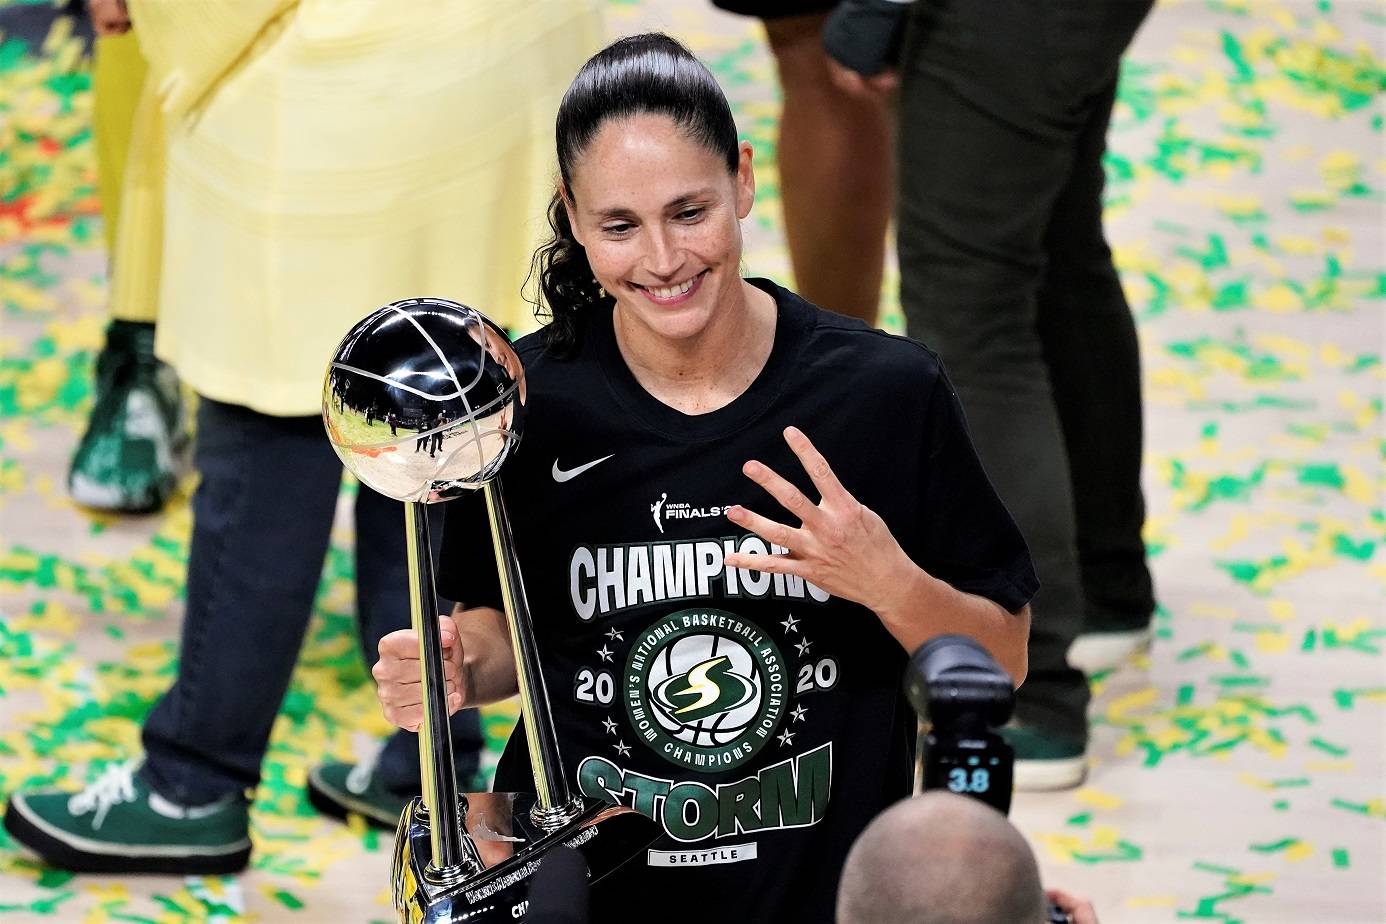 Seattle Storm guard Sue Bird poses for a photo after the team won the WNBA Championship on Tuesday in Bradenton, Fla. (AP Photo/Chris O'Meara)